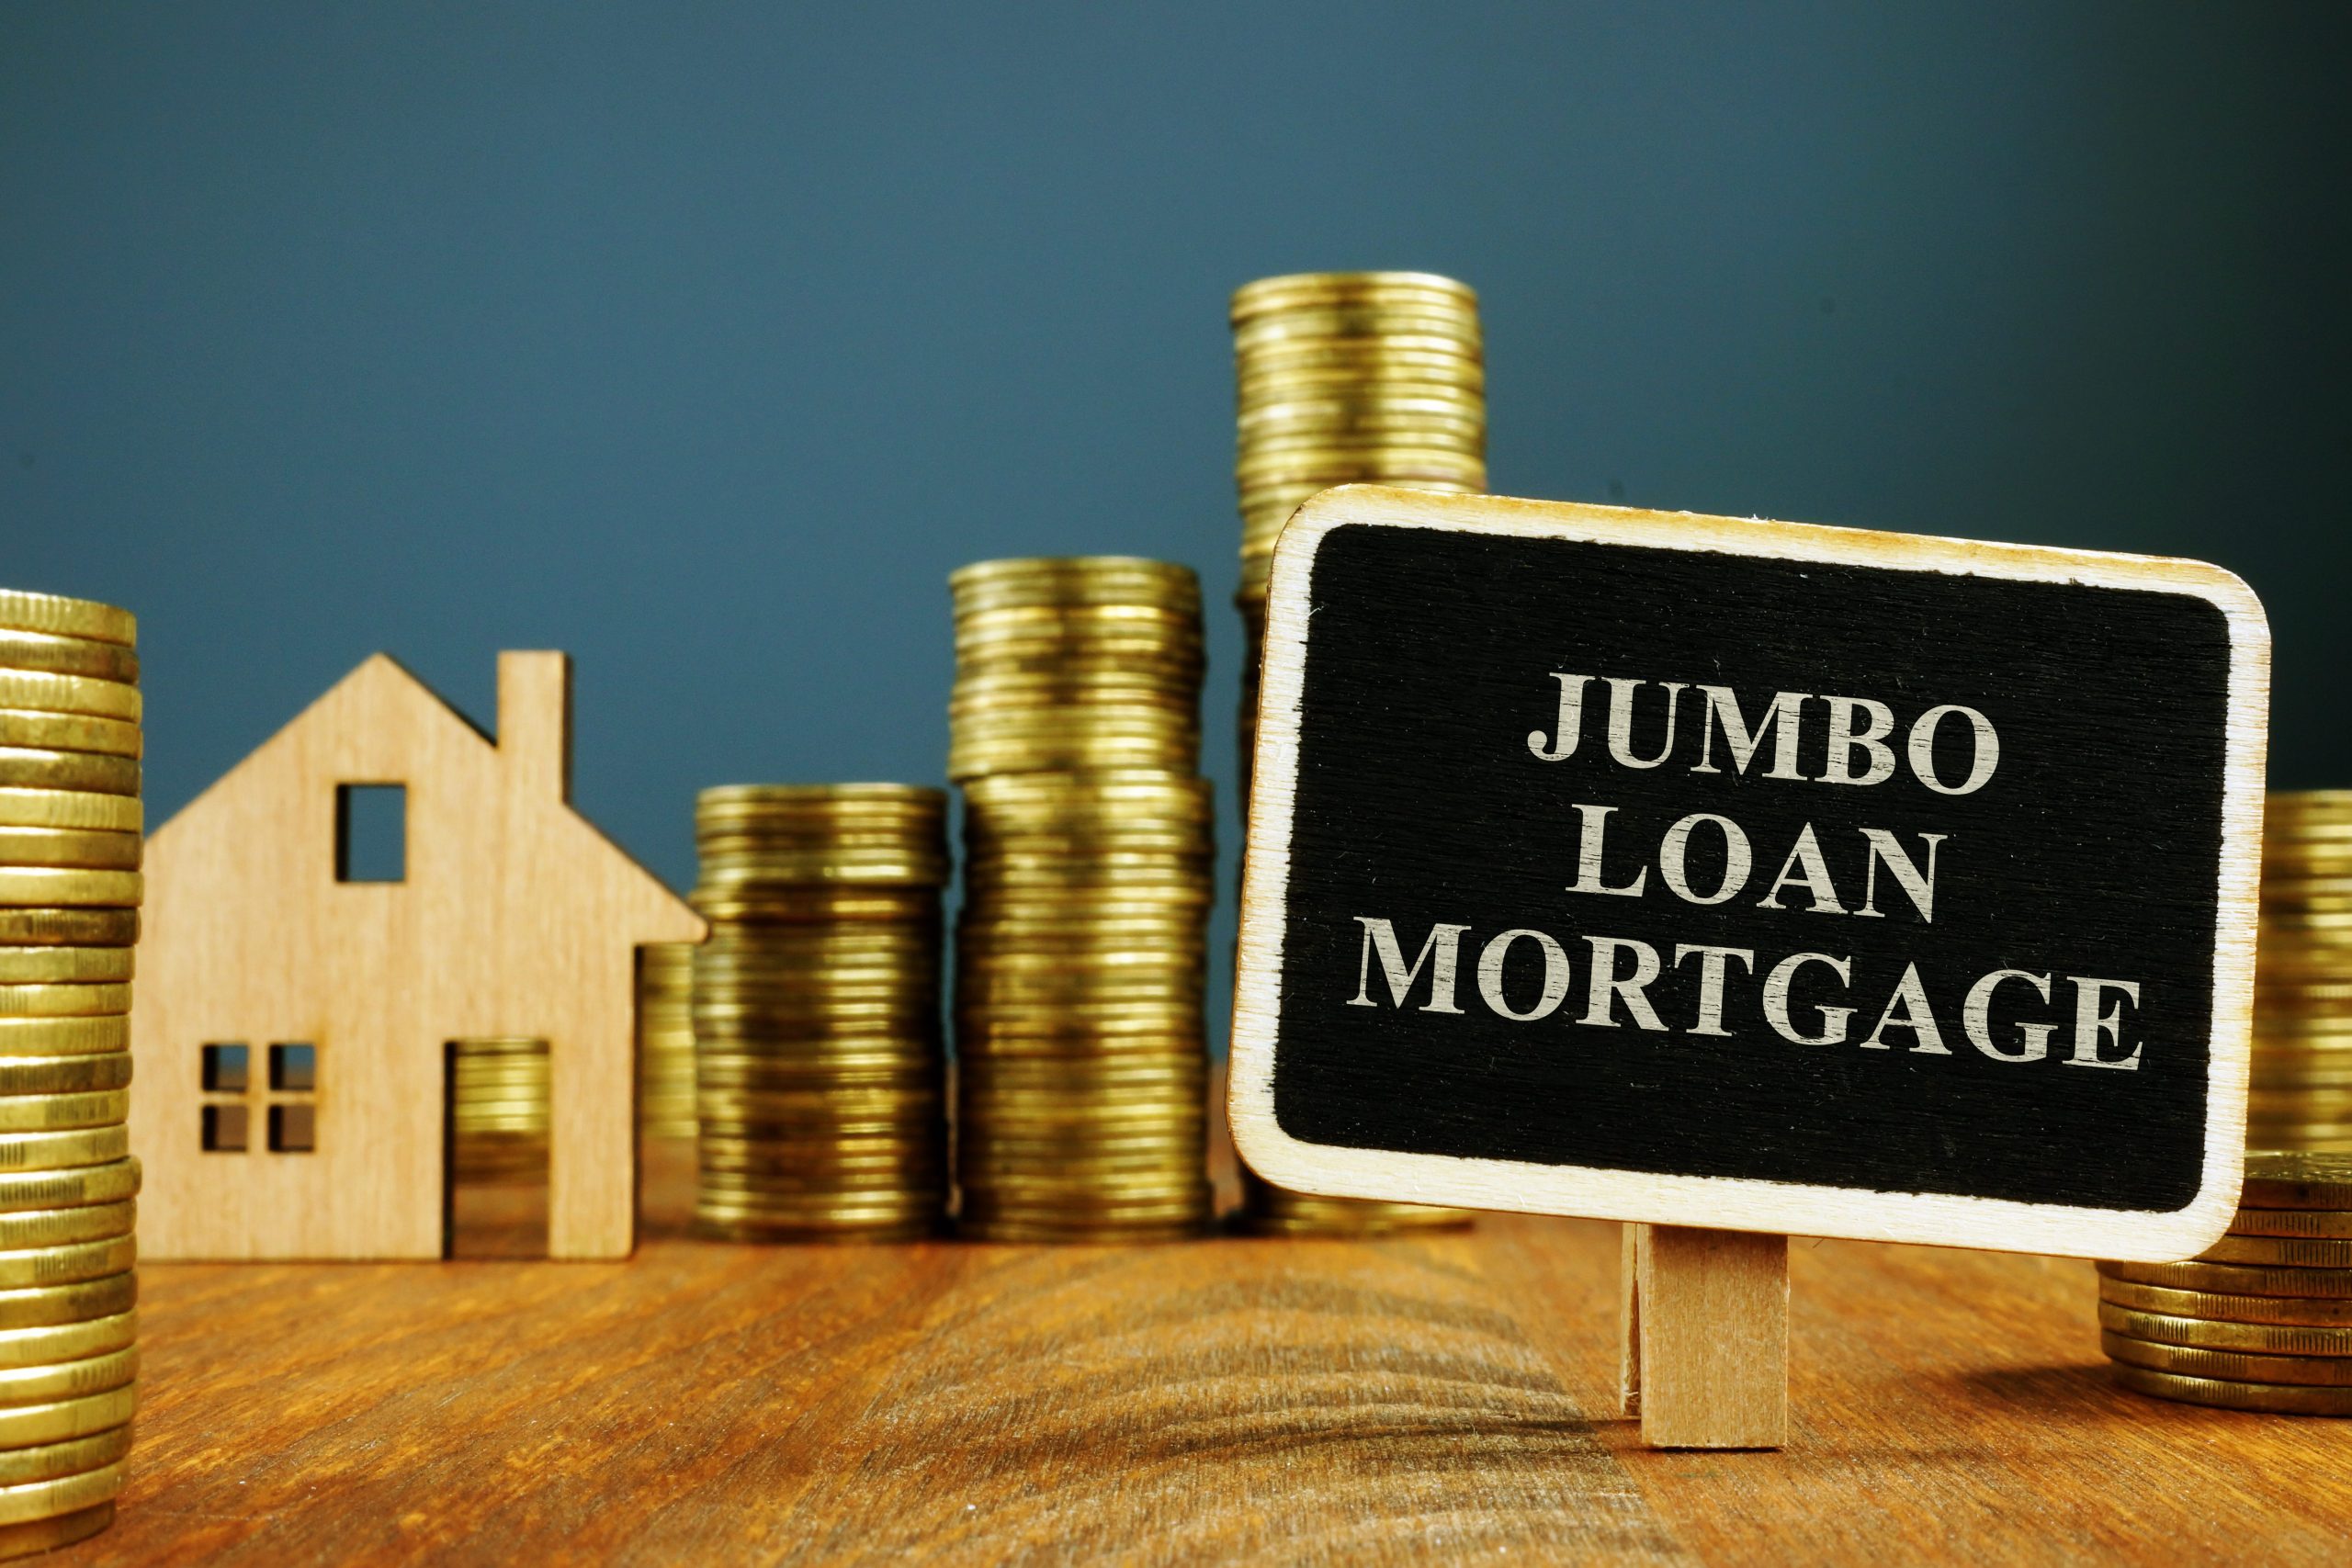 A jumbo loan is a type of mortgage that exceeds the conforming loan limits set by government-sponsored enterprises